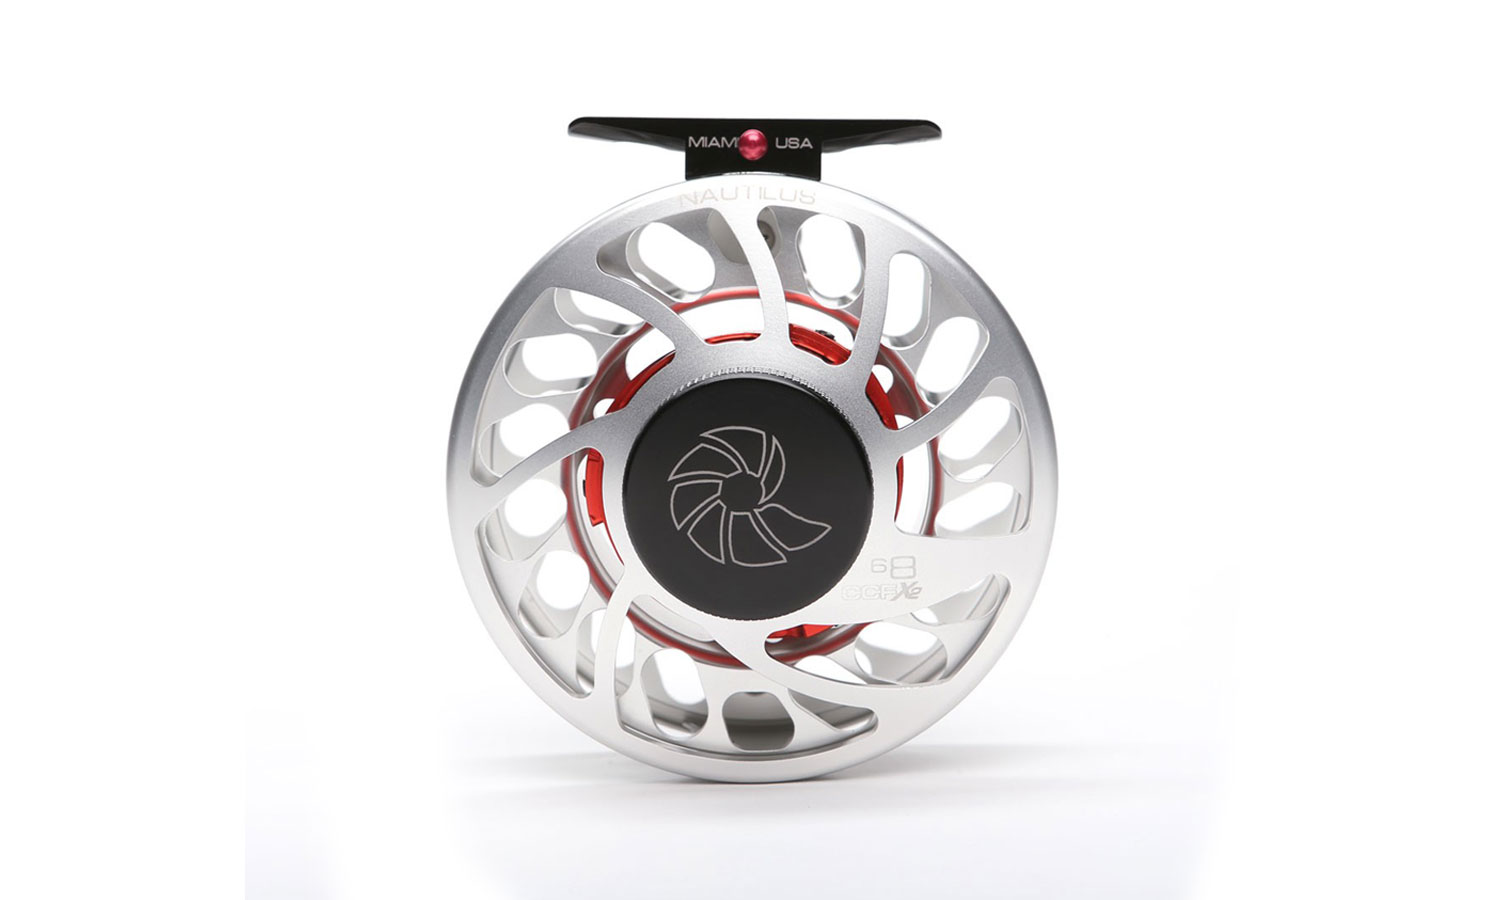 IN DEPTH] NAUTILUS REEL REVIEW FROM A GUIDE 